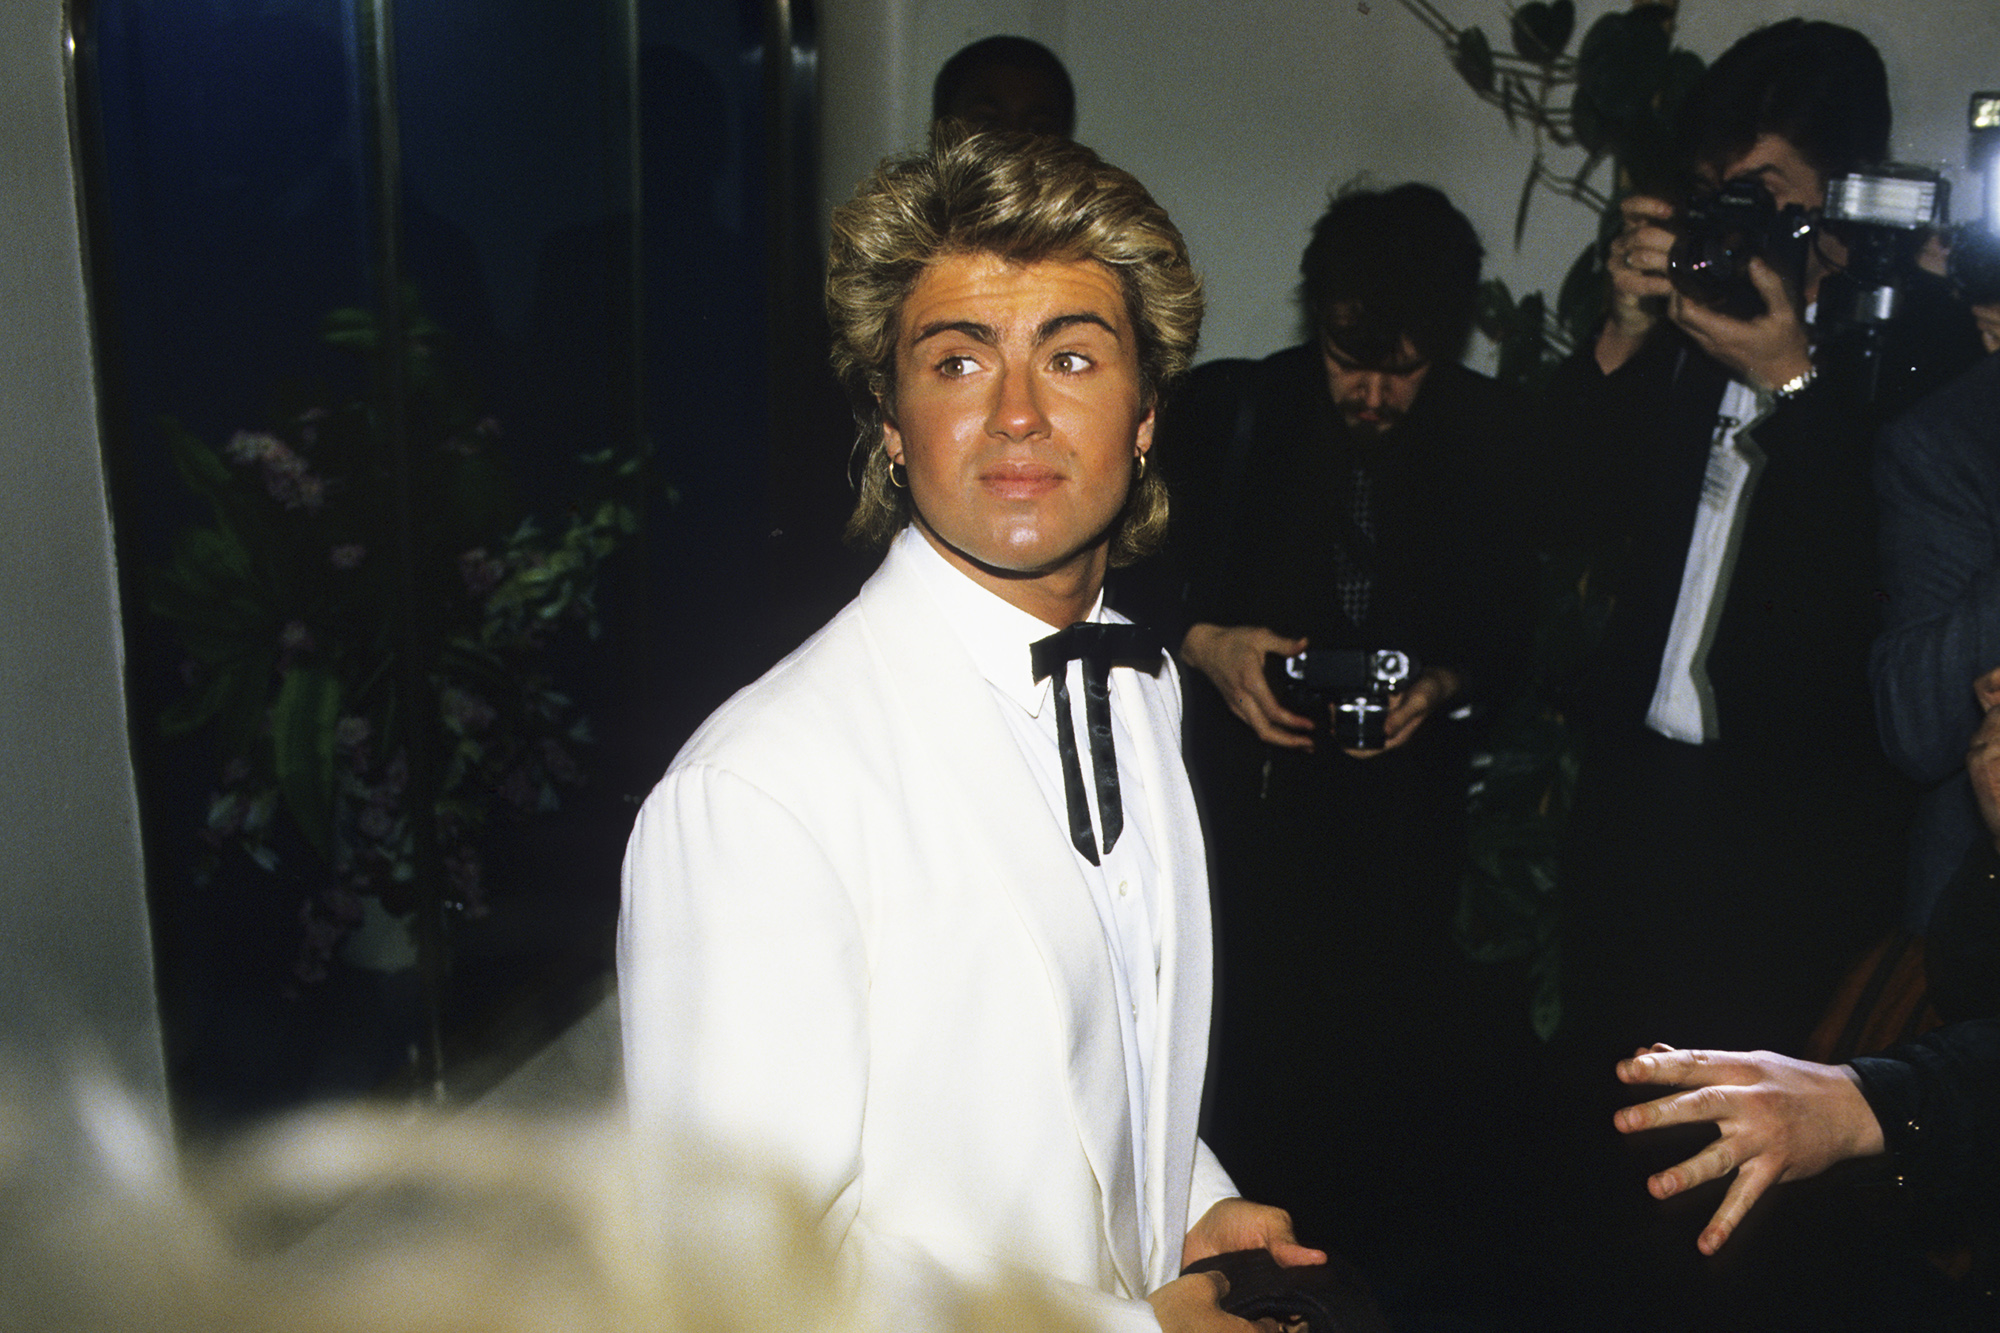 George Michael attends the BRIT Awards in London, on Feb. 11, 1985.